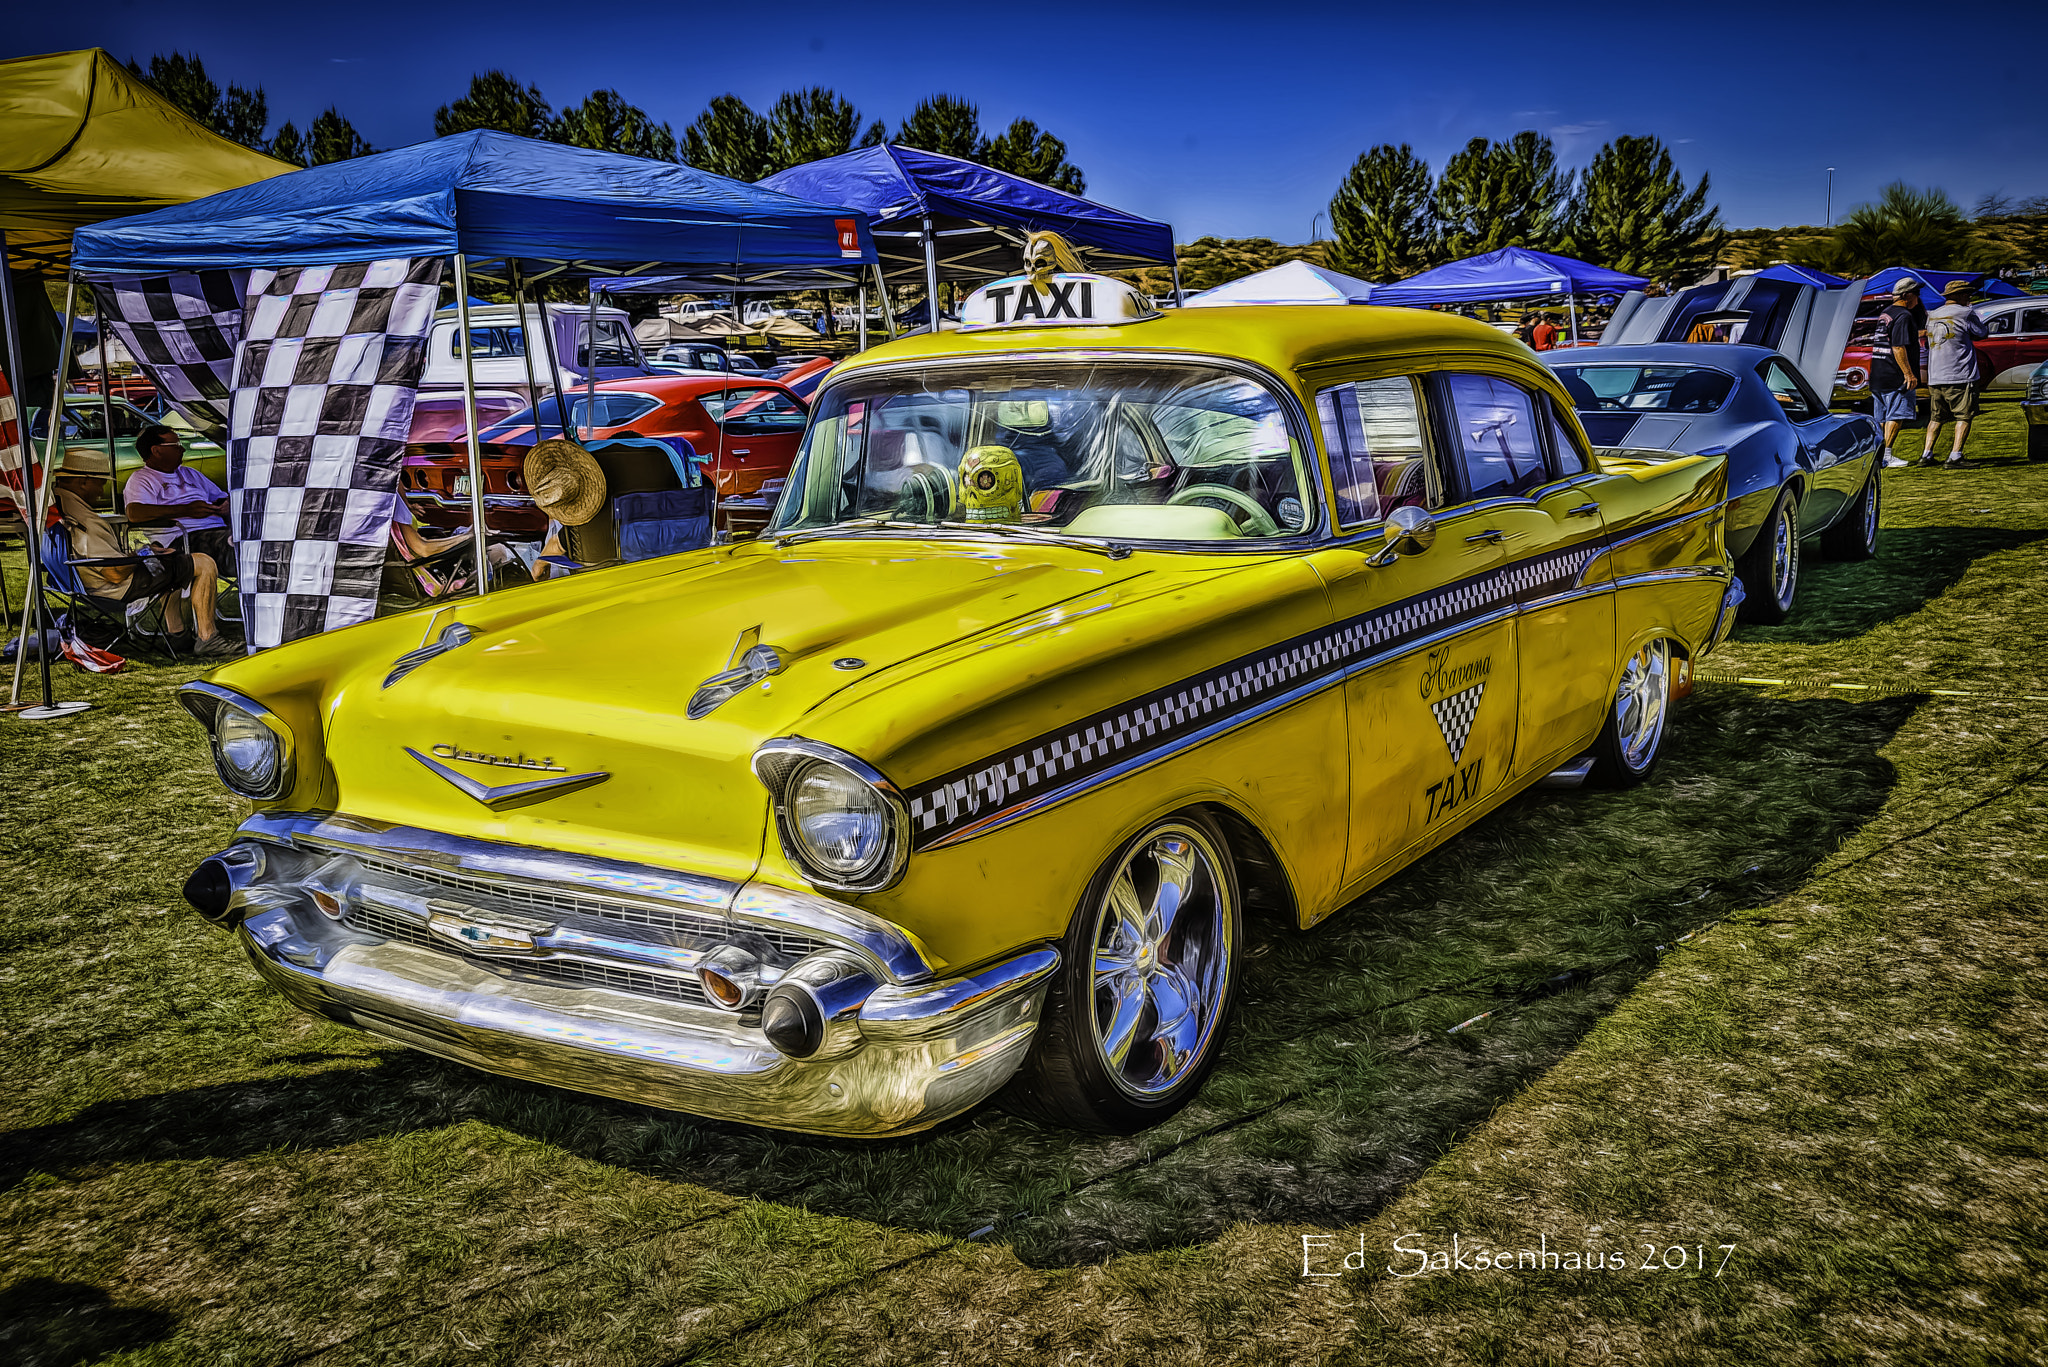 Nikon D800 + AF Zoom-Nikkor 24-120mm f/3.5-5.6D IF sample photo. Souped up chevy taxi photography